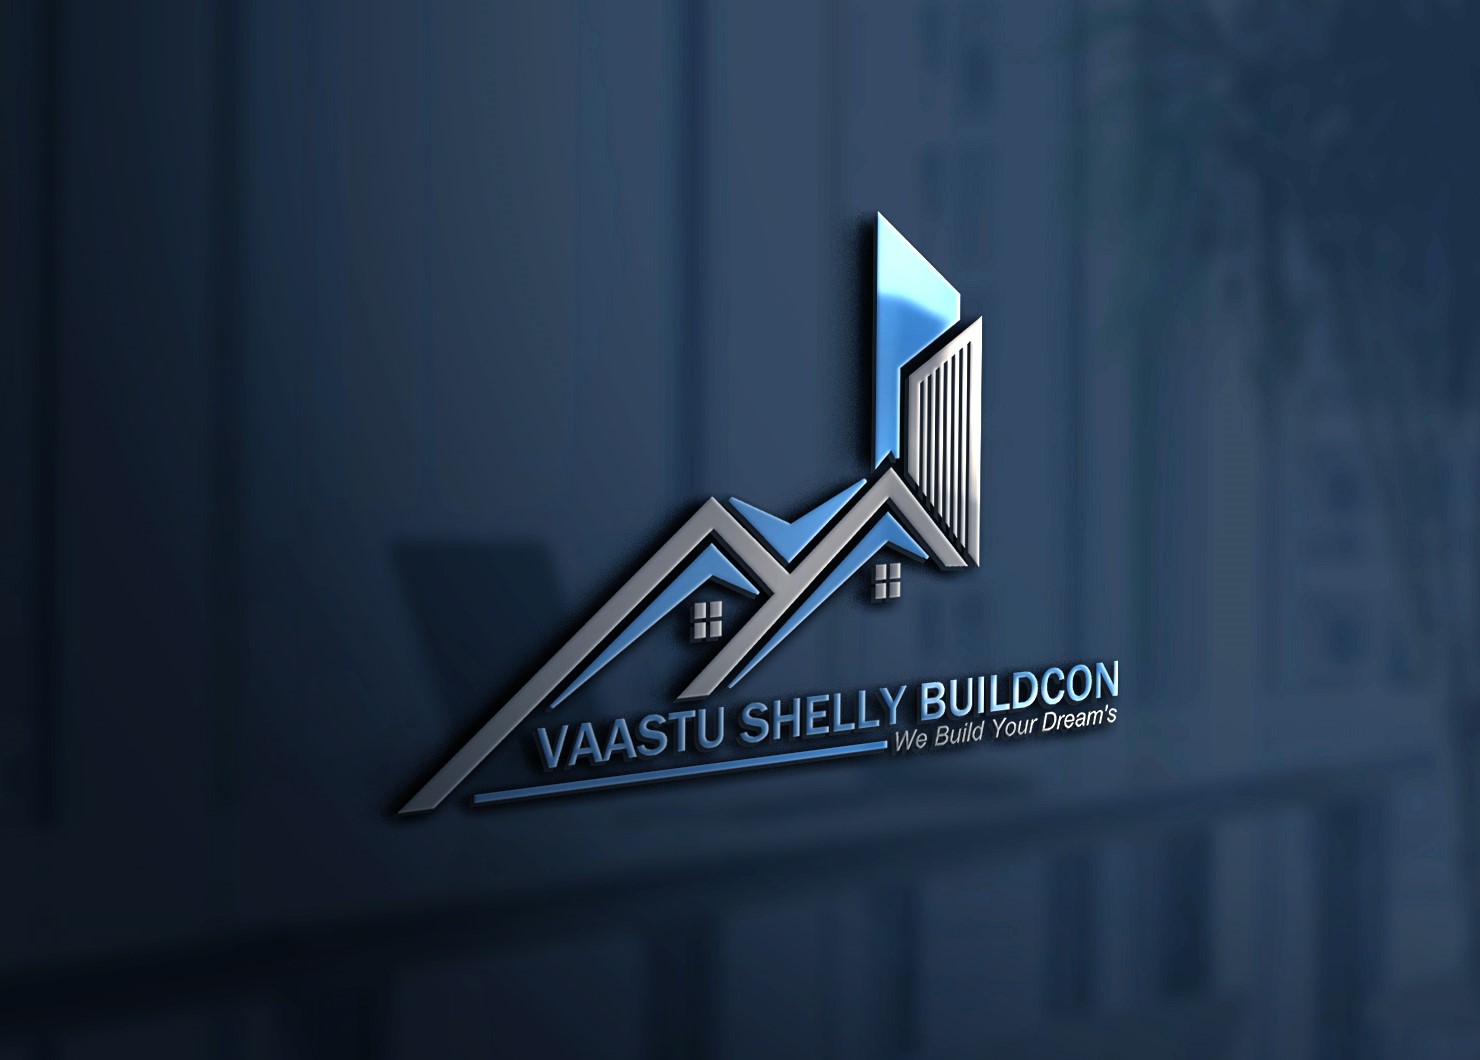 Vaastu Shelly Buildcon|Legal Services|Professional Services